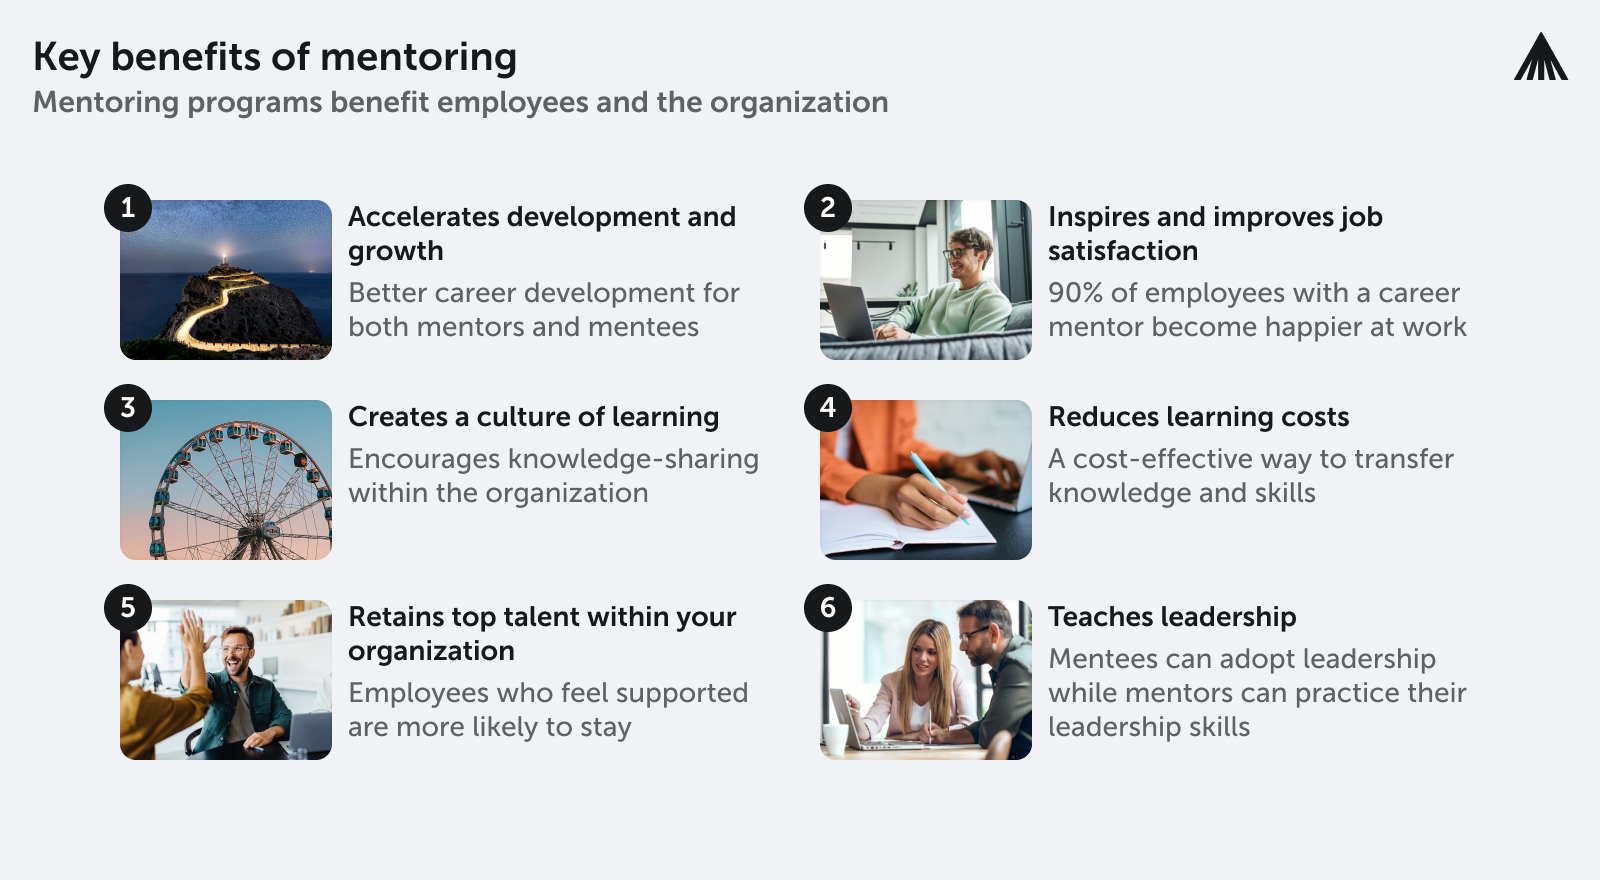 The list of key benefits of mentoring for the organization